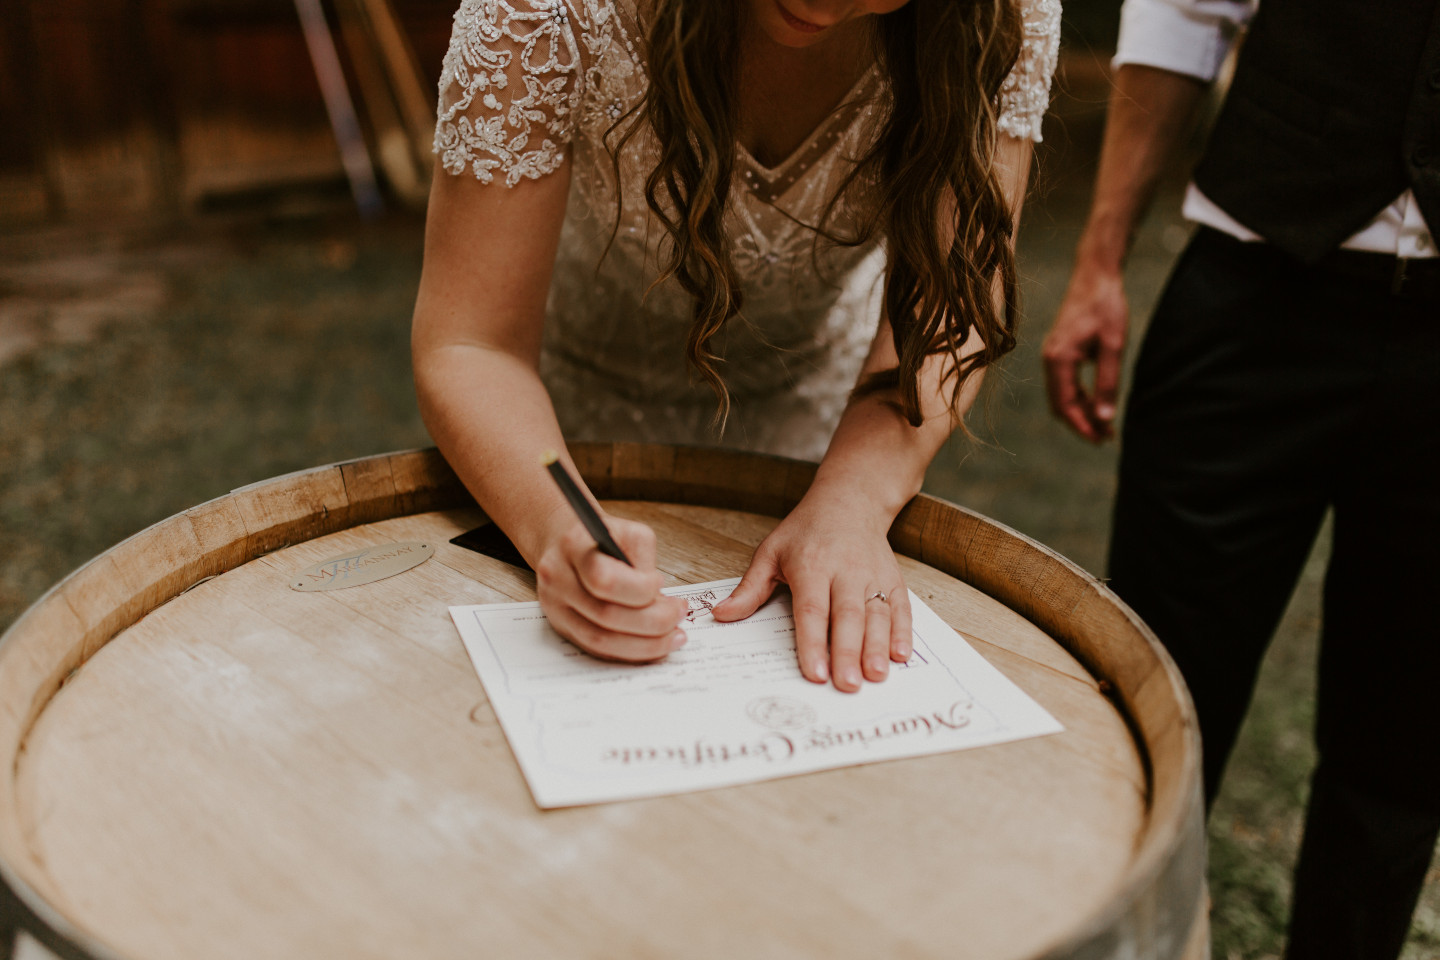 Hannah and Dan sign their marriage certificate in Corvallis, Oregon. Intimate wedding photography in Corvallis Oregon by Sienna Plus Josh.